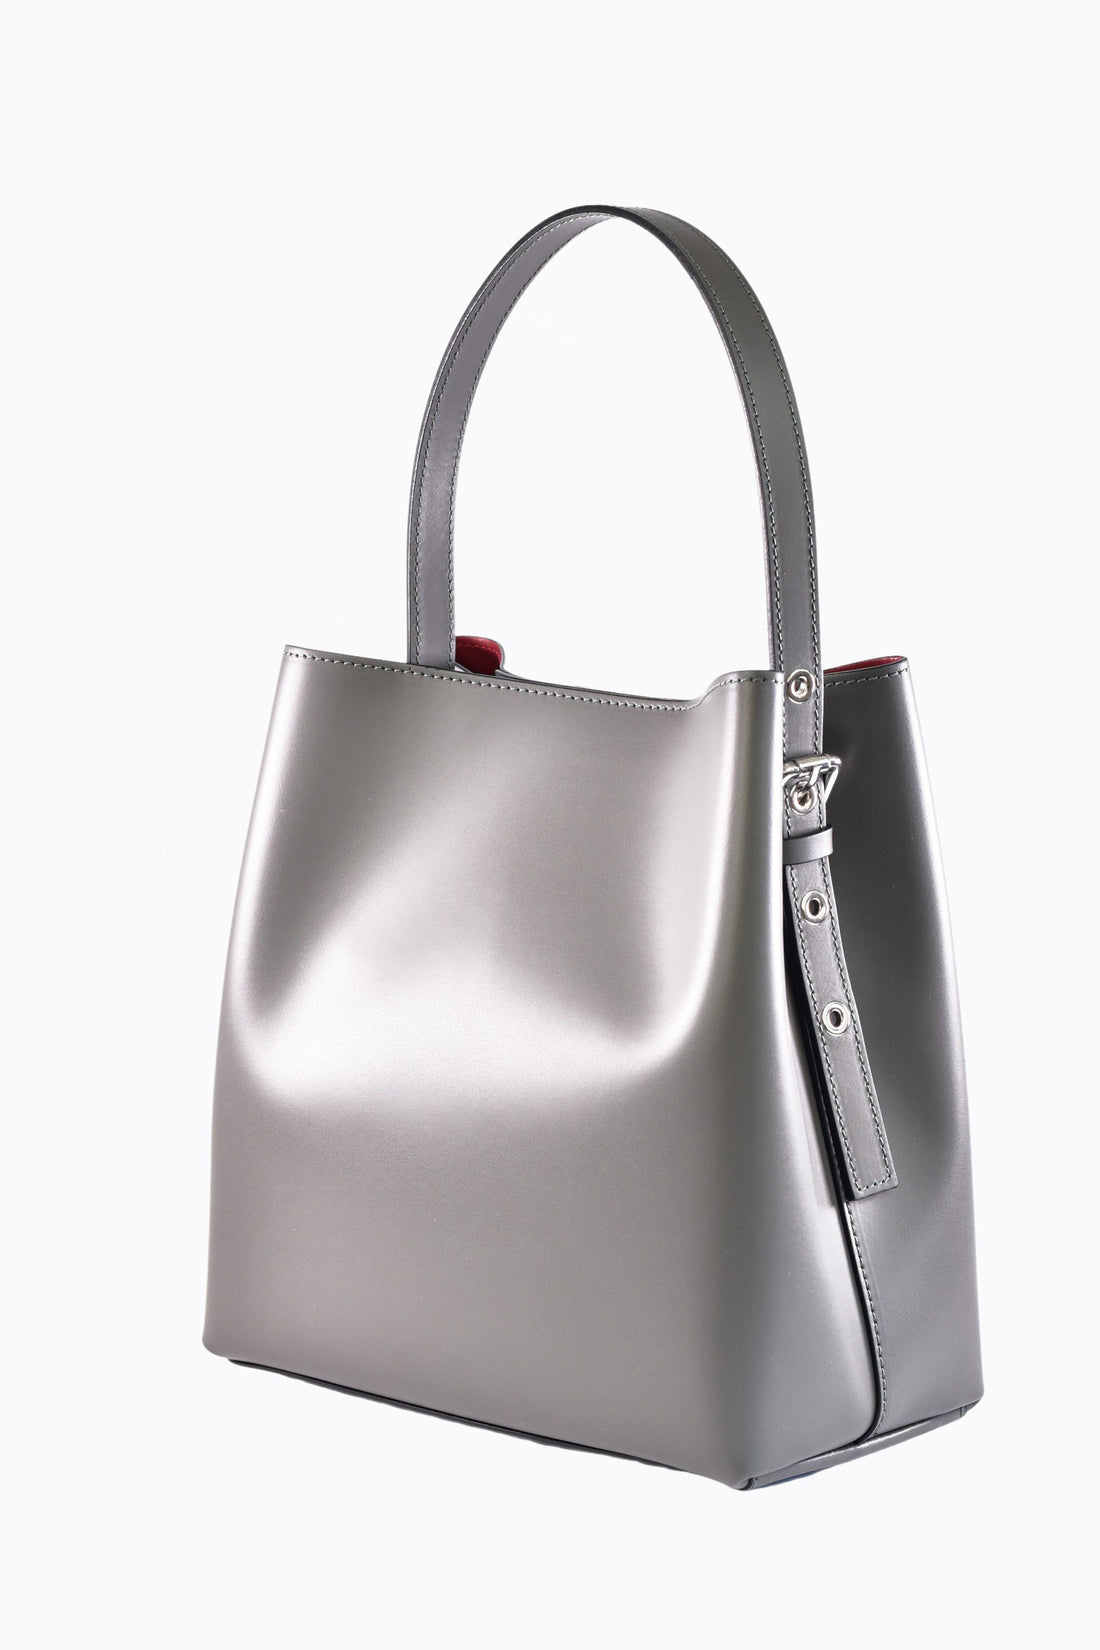 Melany bag in gray brushed leather